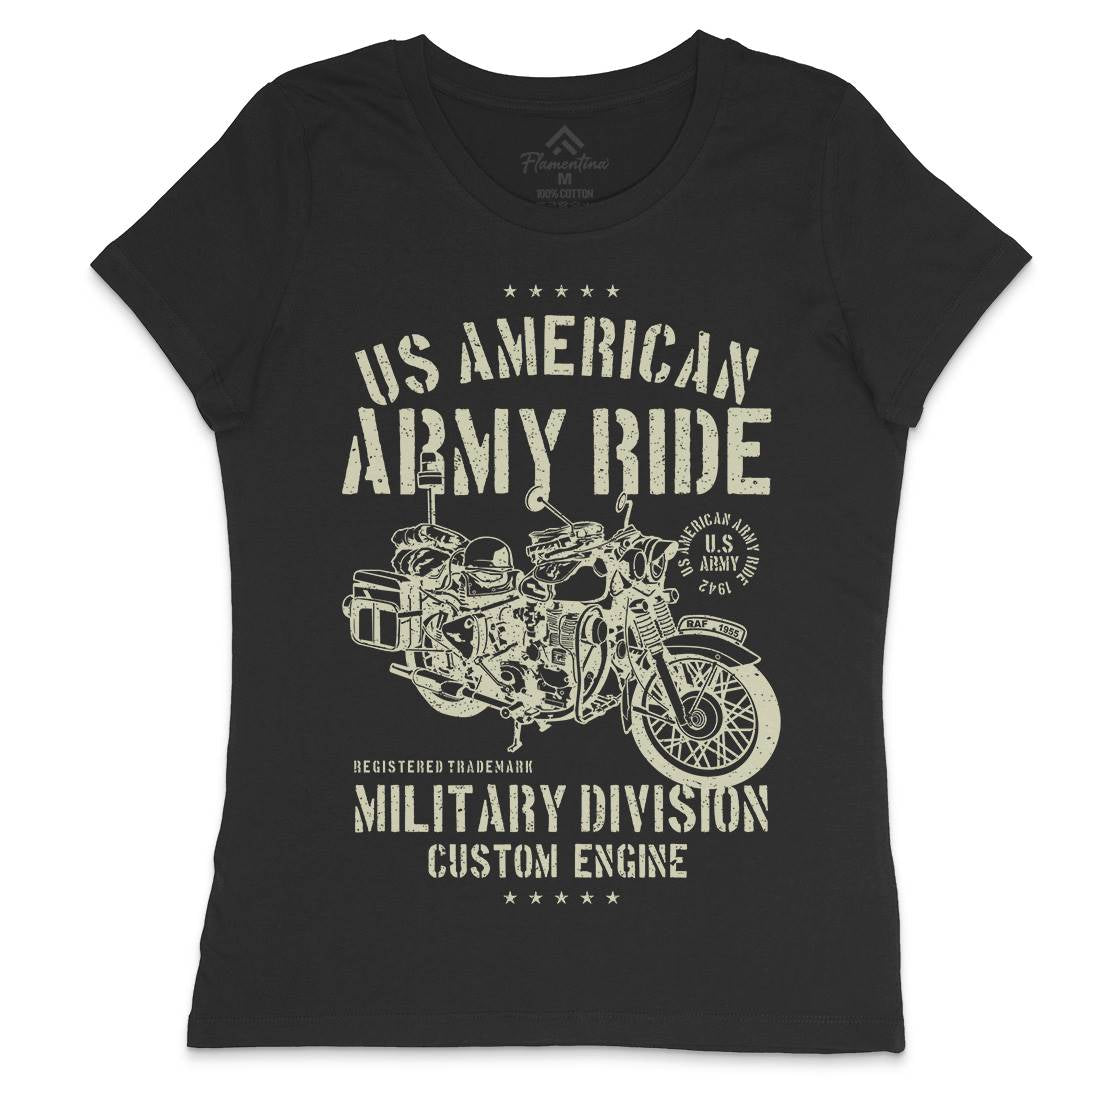 Ride Womens Crew Neck T-Shirt Army A613